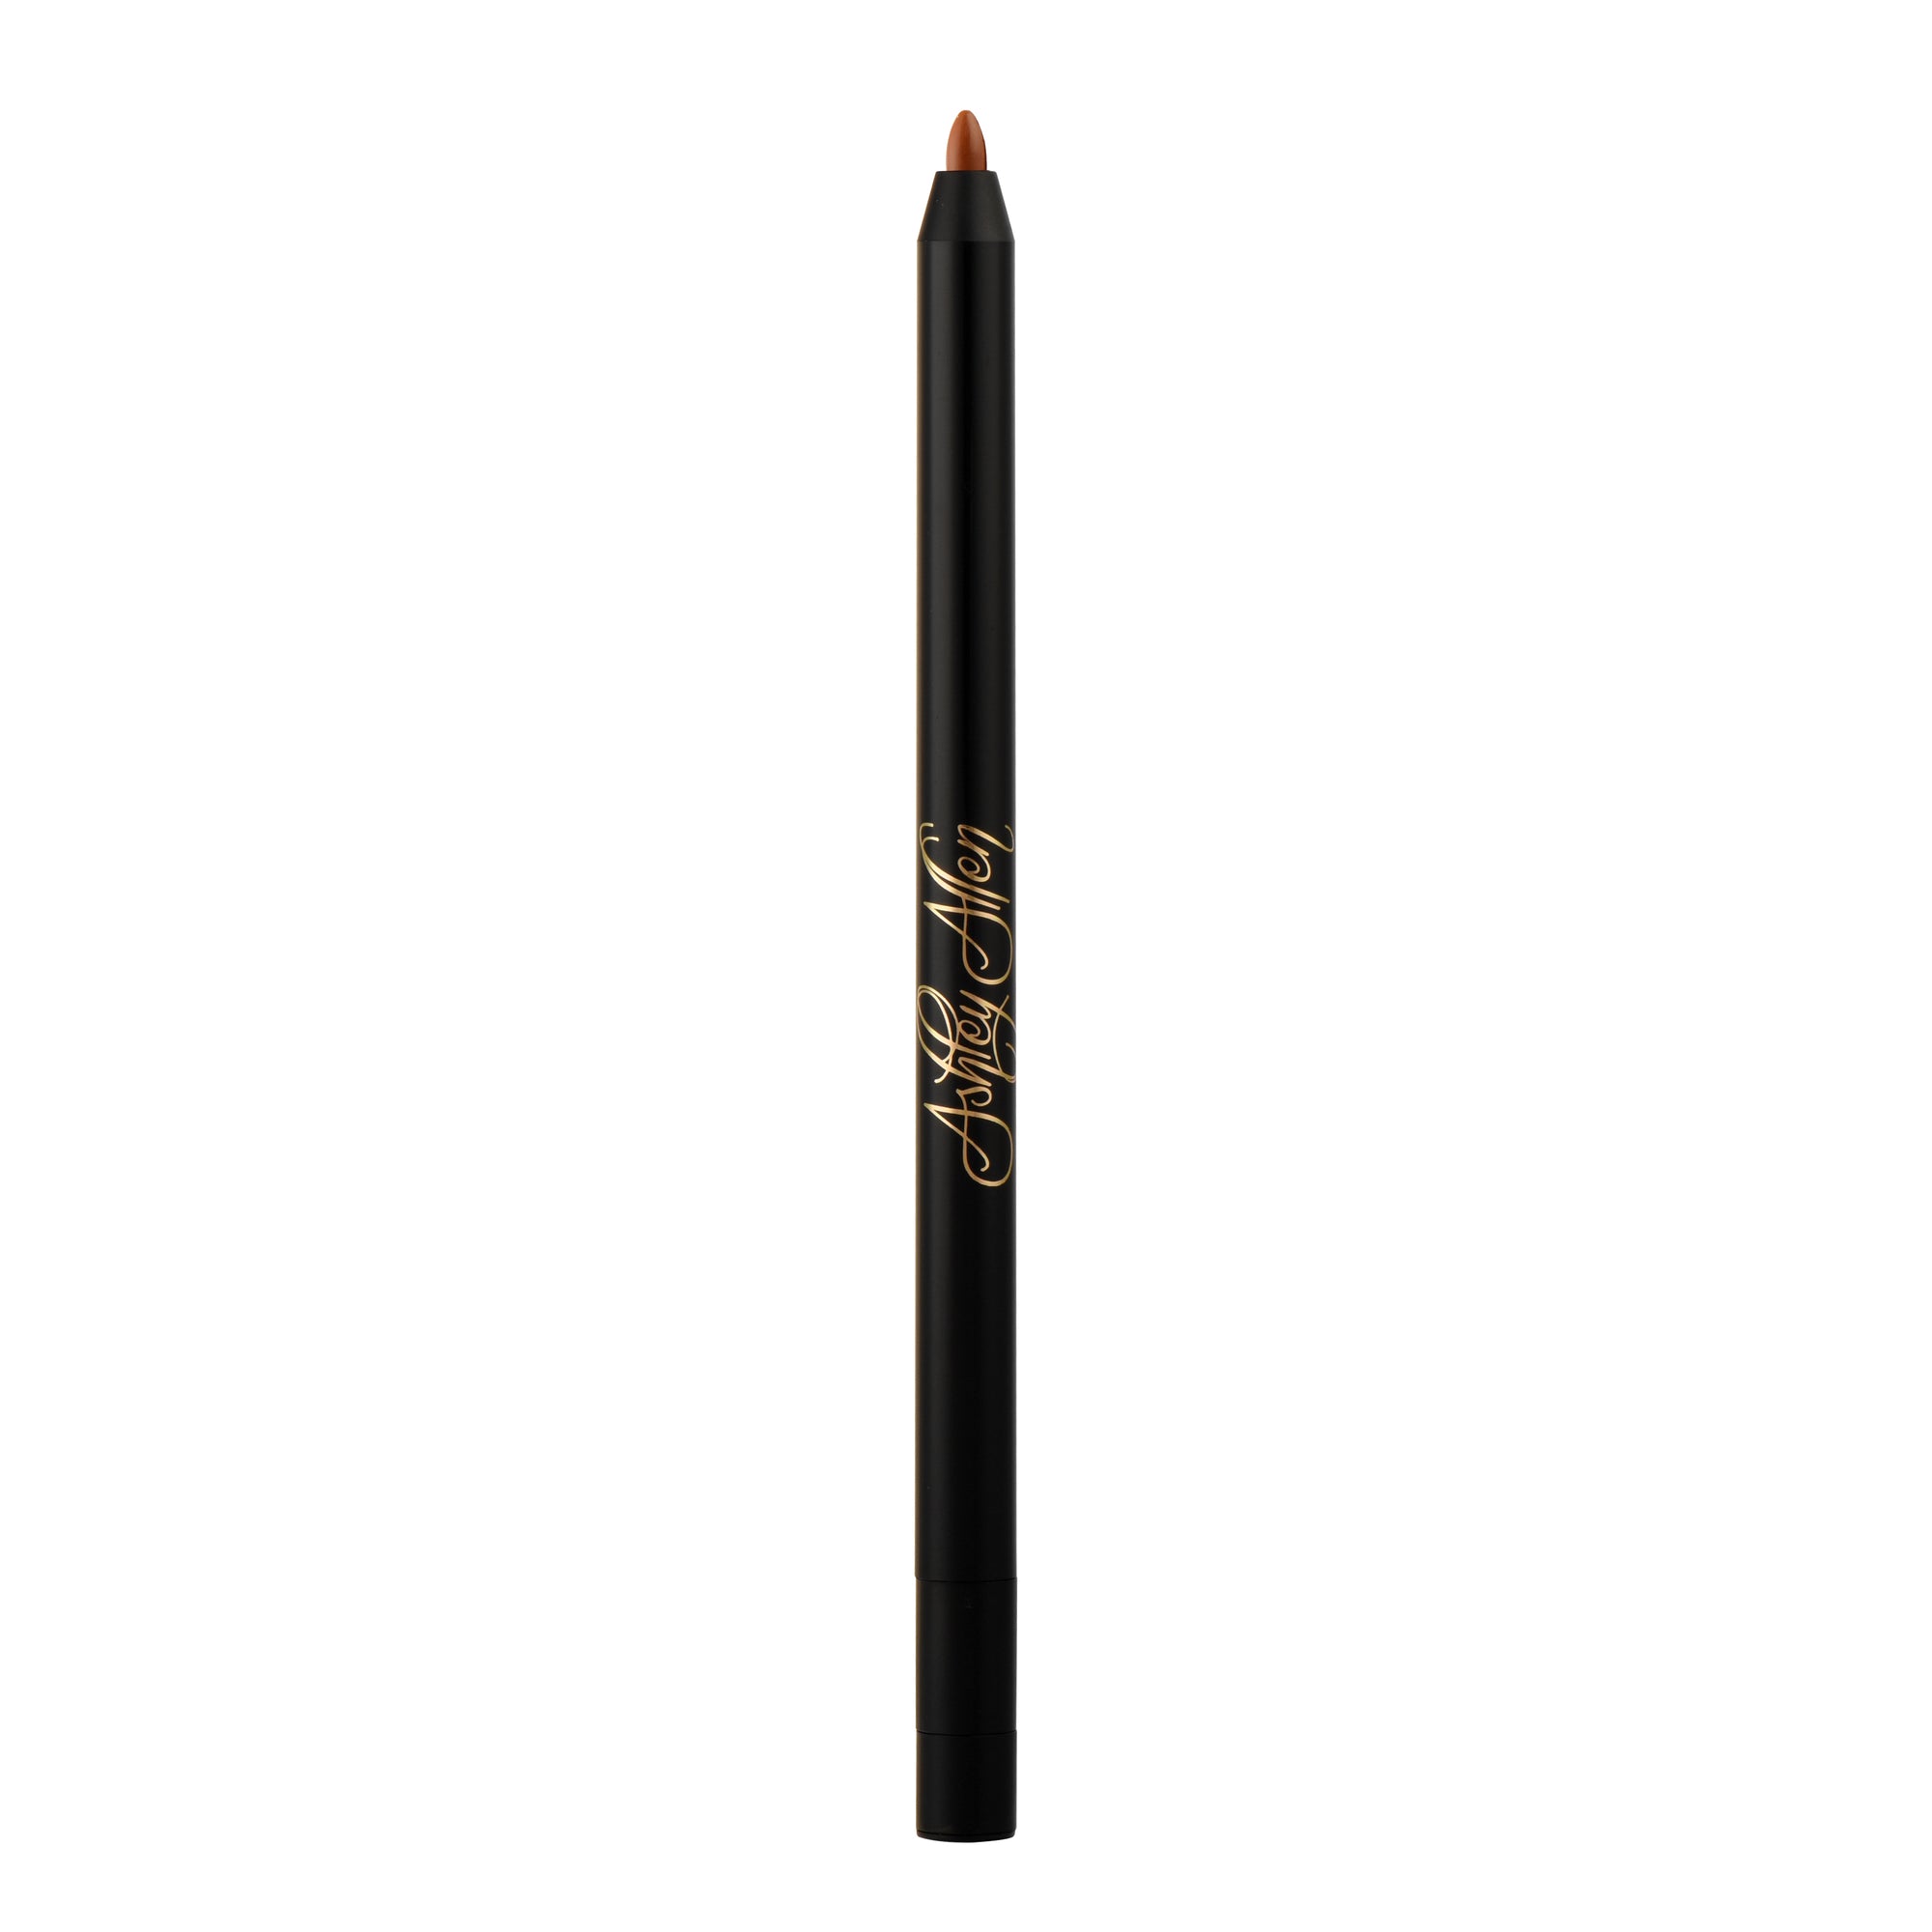 Lip Liner N002 (50% OFF) will be $11.00 activated at checkout